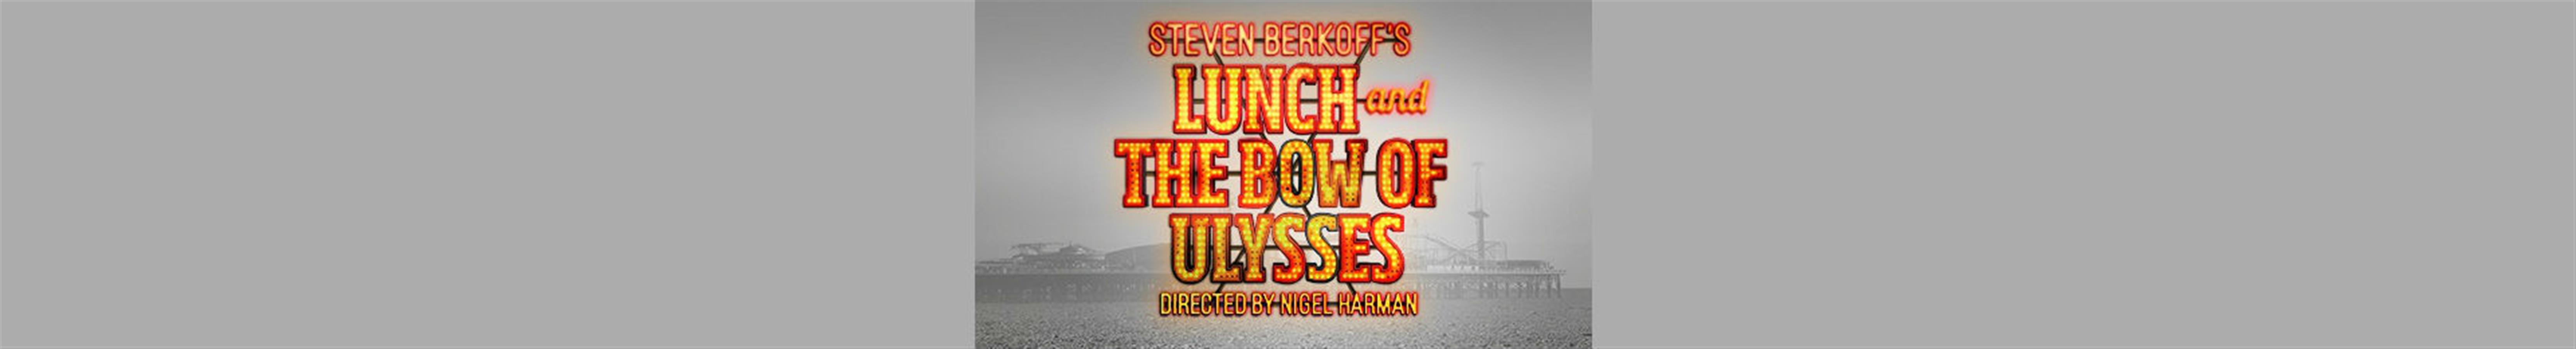 Luch and The Bow of Ulysses tickets